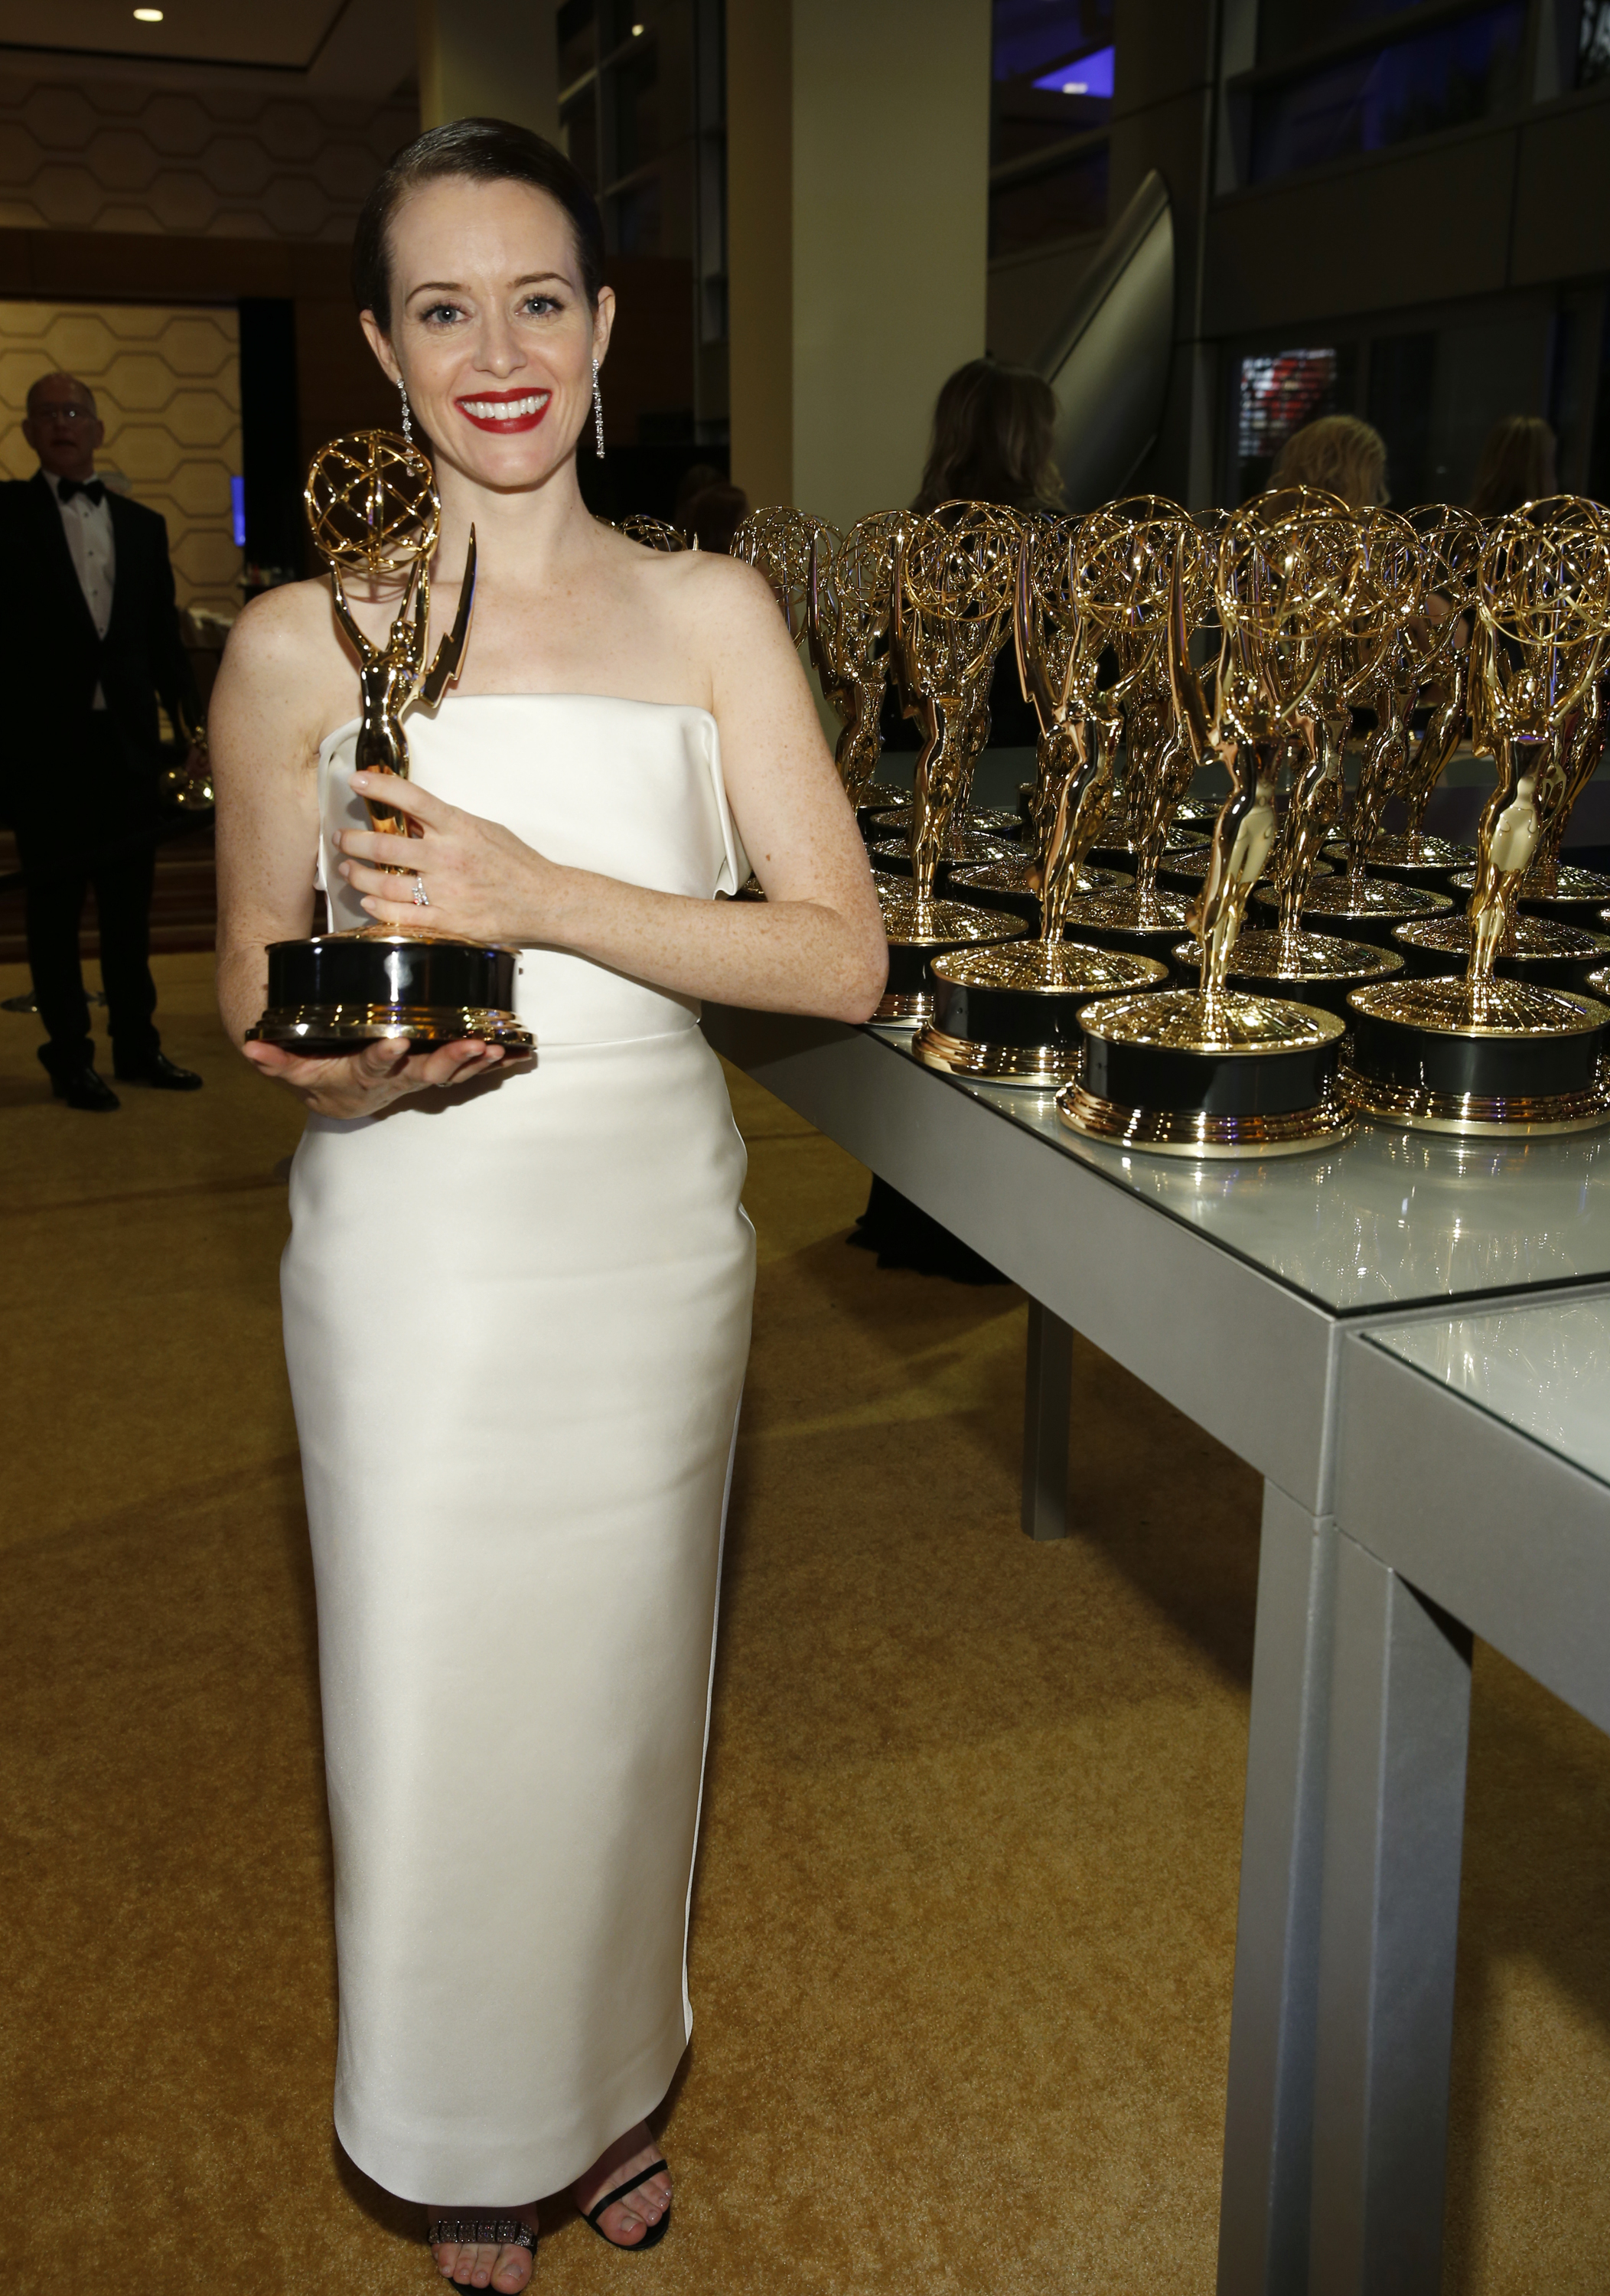 Claire FoClaire Foy Emmy Awards 4chion Lifestyley Emmy Awards 4chion Lifestyle